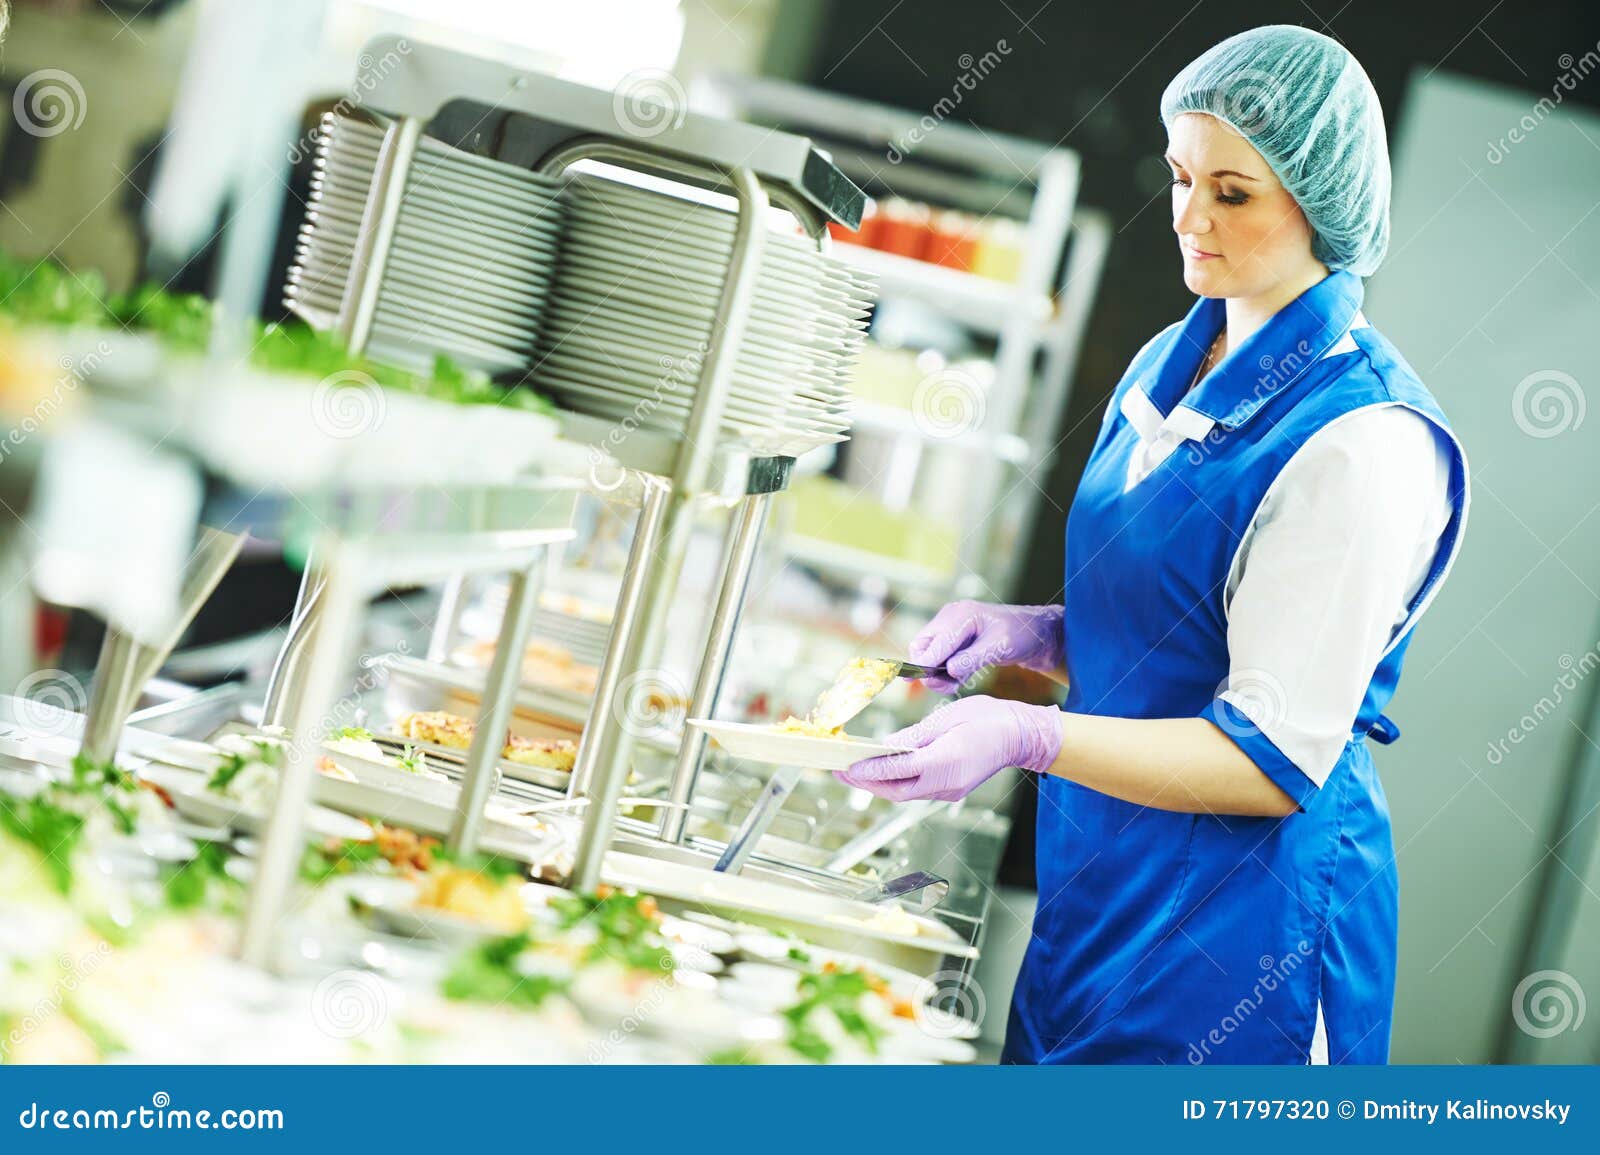 buffet female worker servicing food in cafeteria